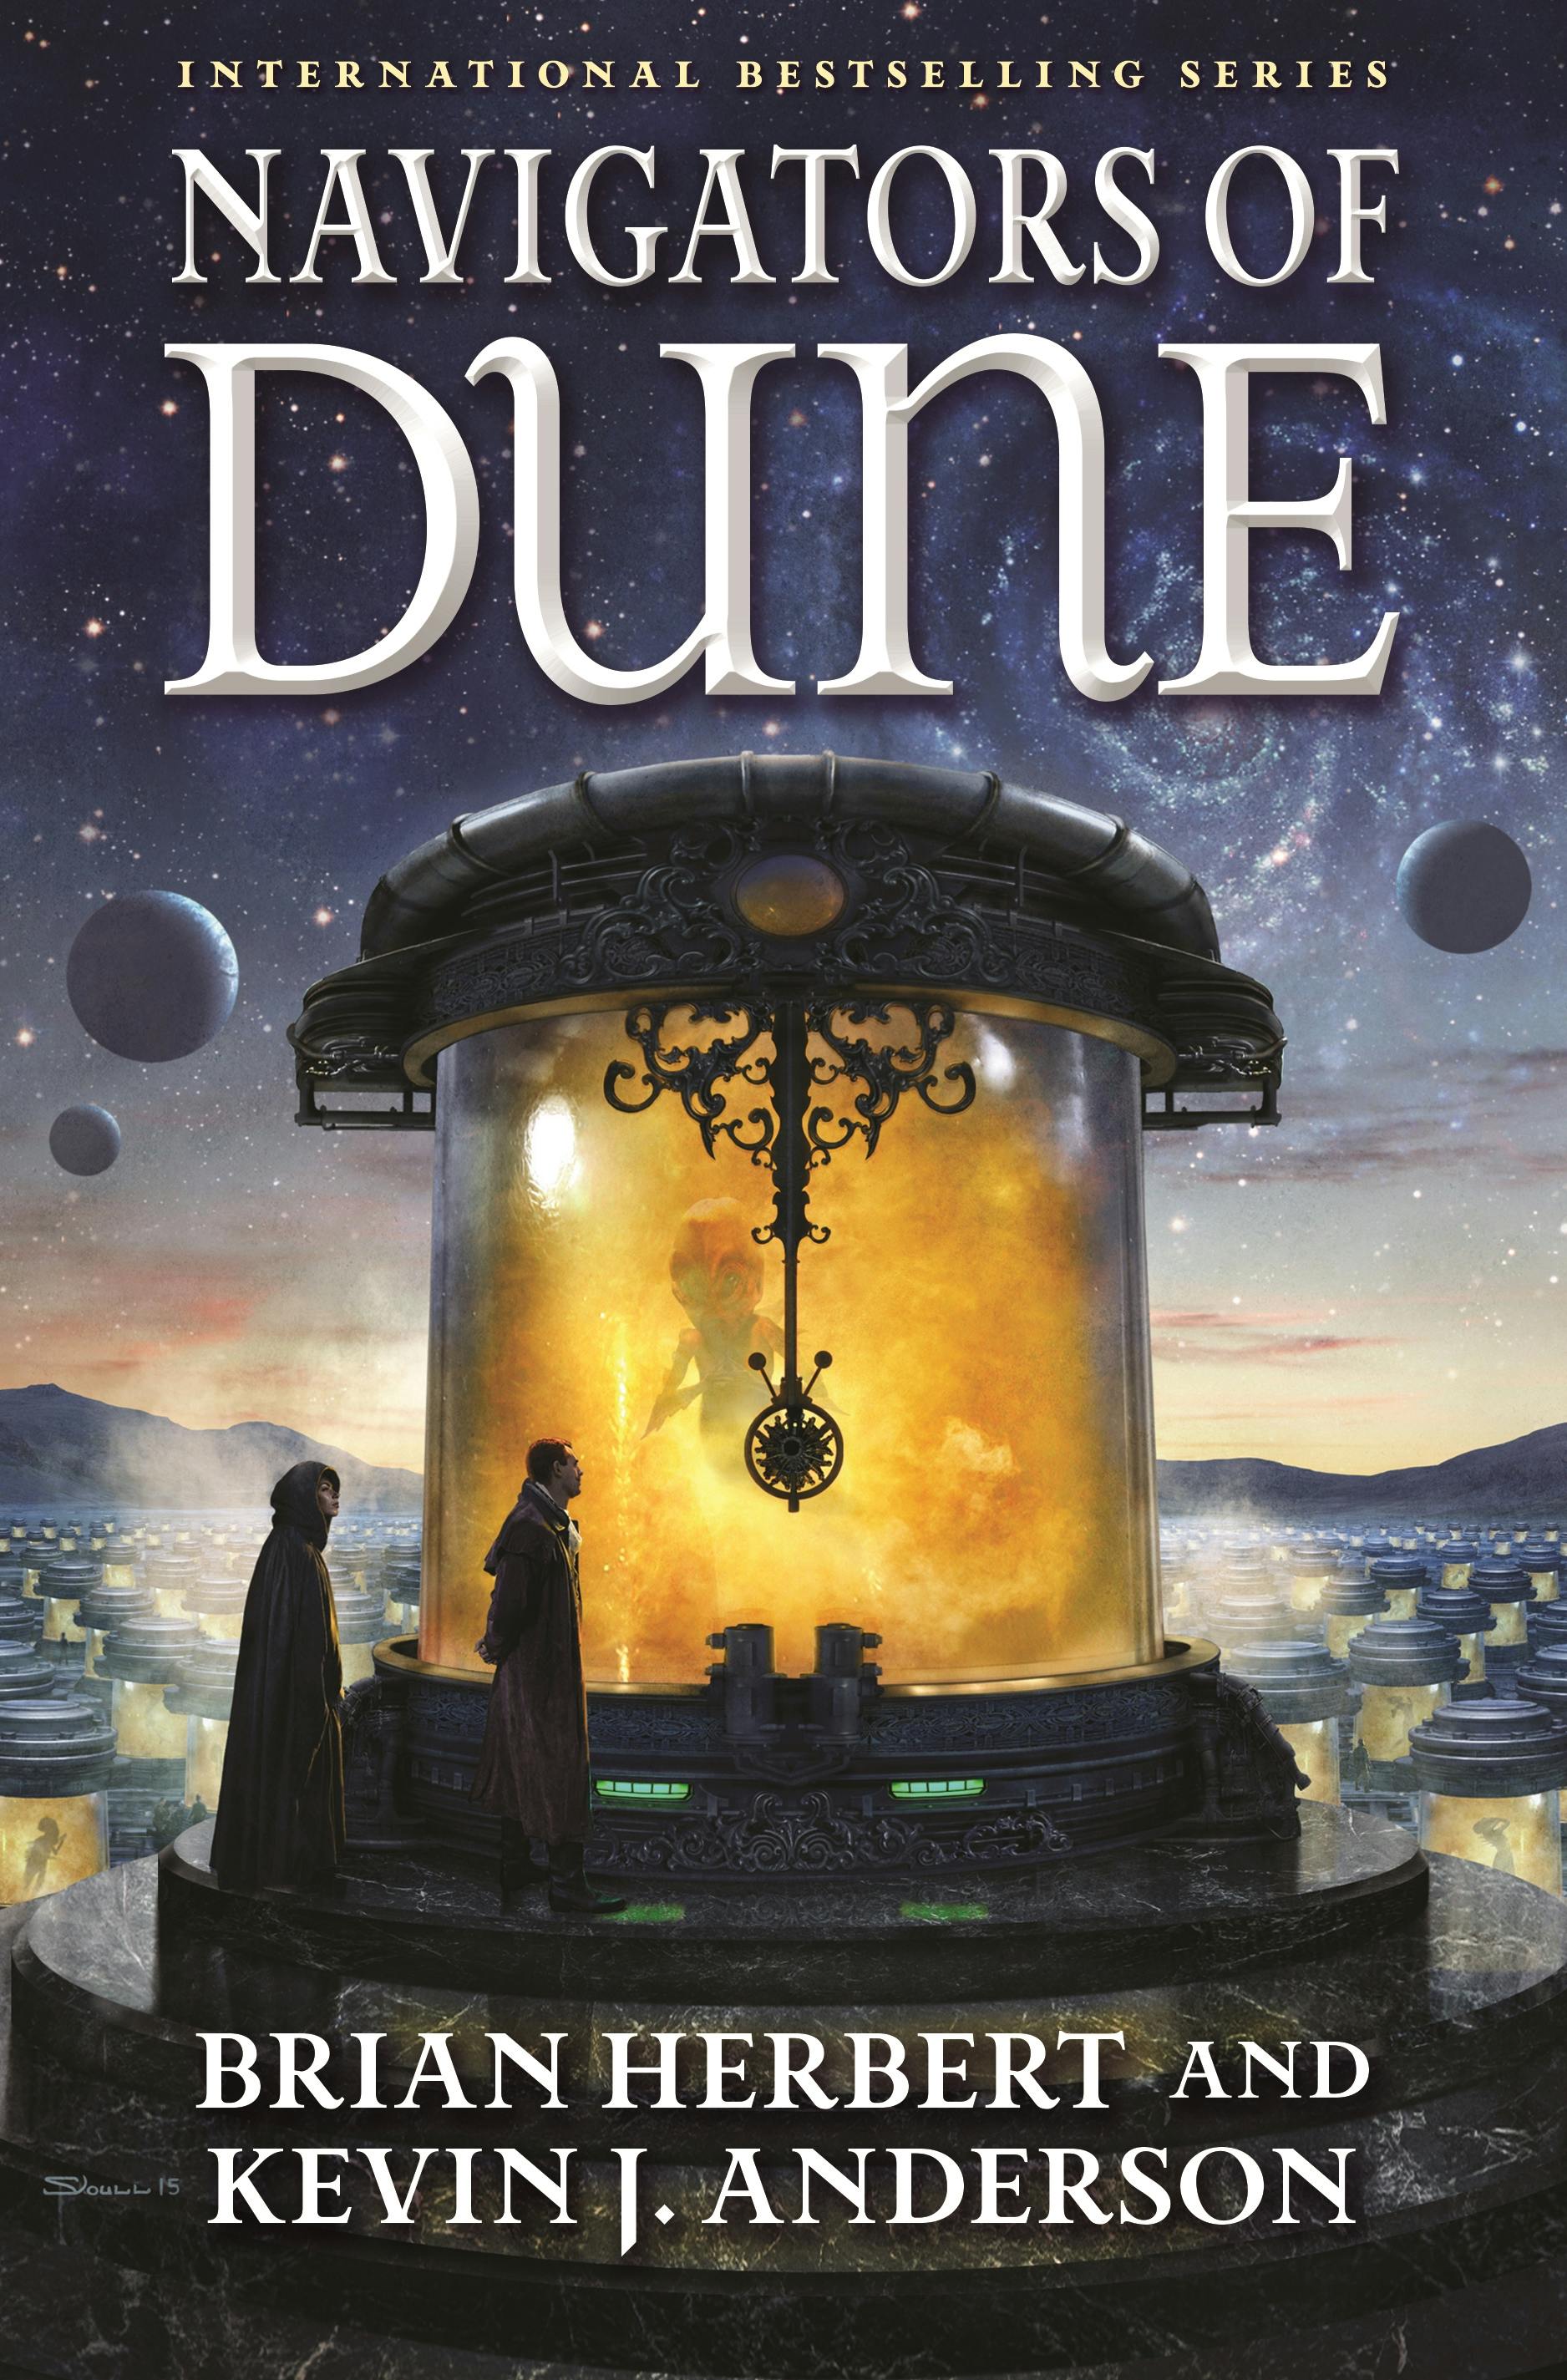 Cover for the book titled as: Navigators of Dune